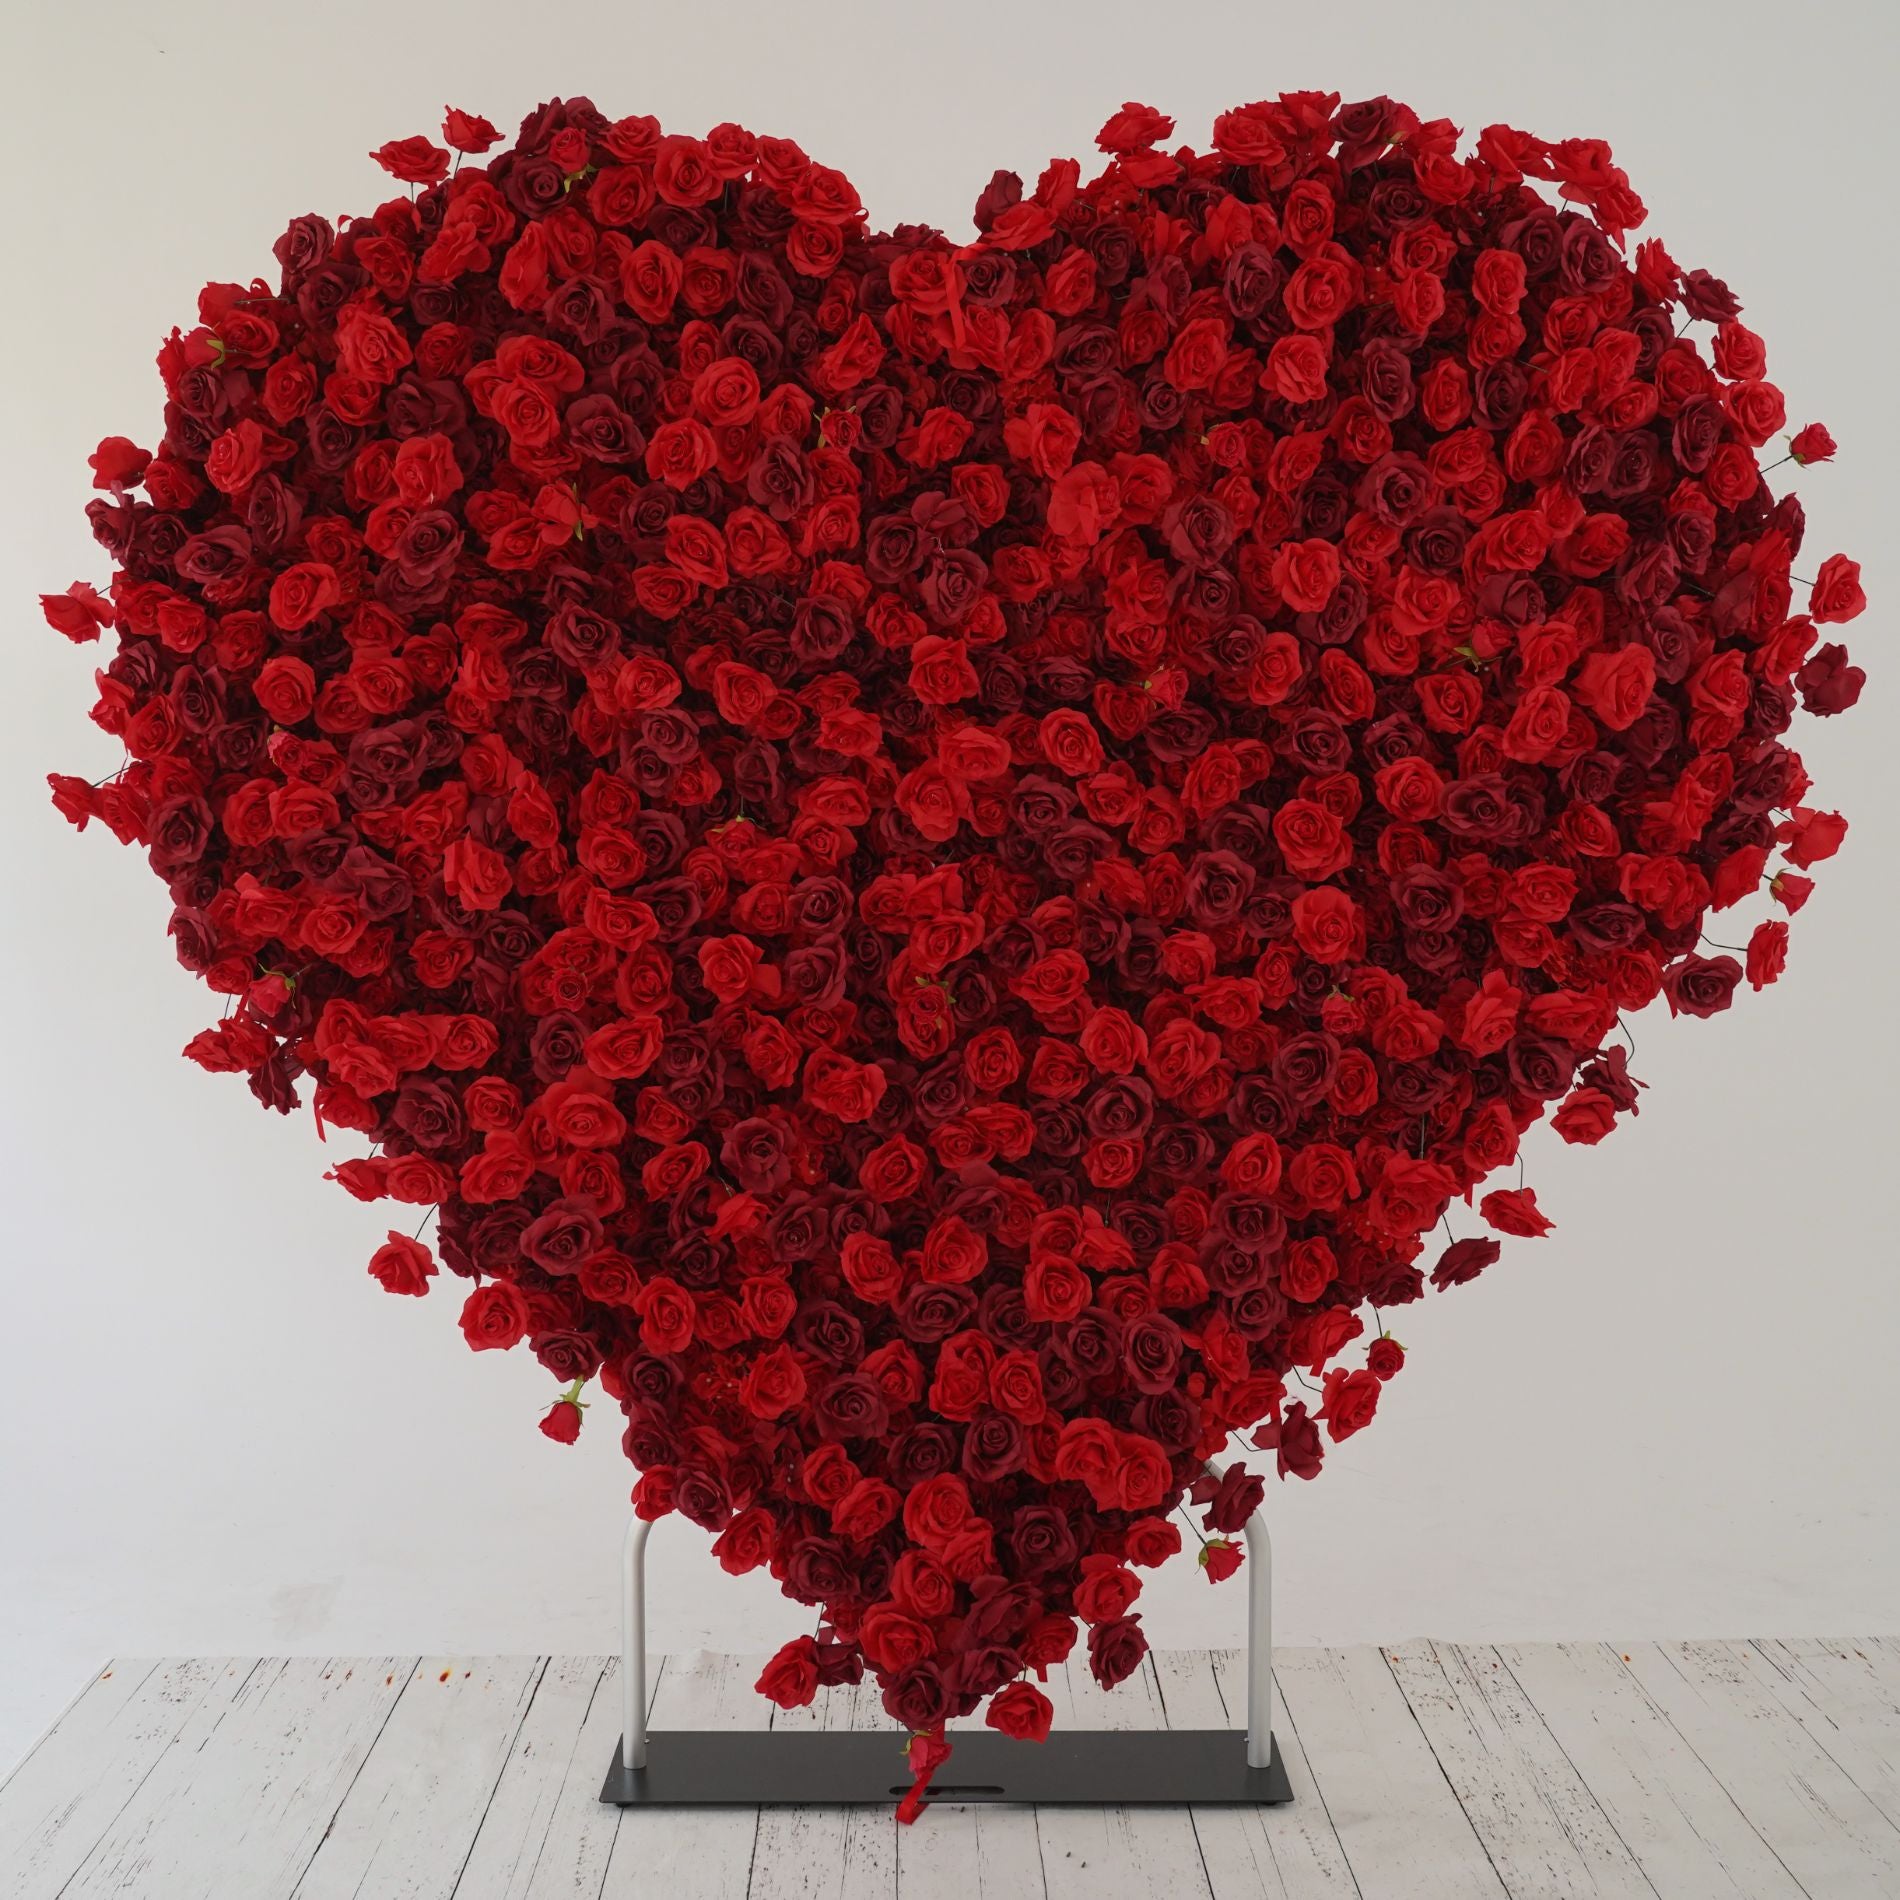 Flower Wall Heart Shaped Red Rose Wall Fabric Curtain Floral Backdrop Wedding Party Proposal Decor